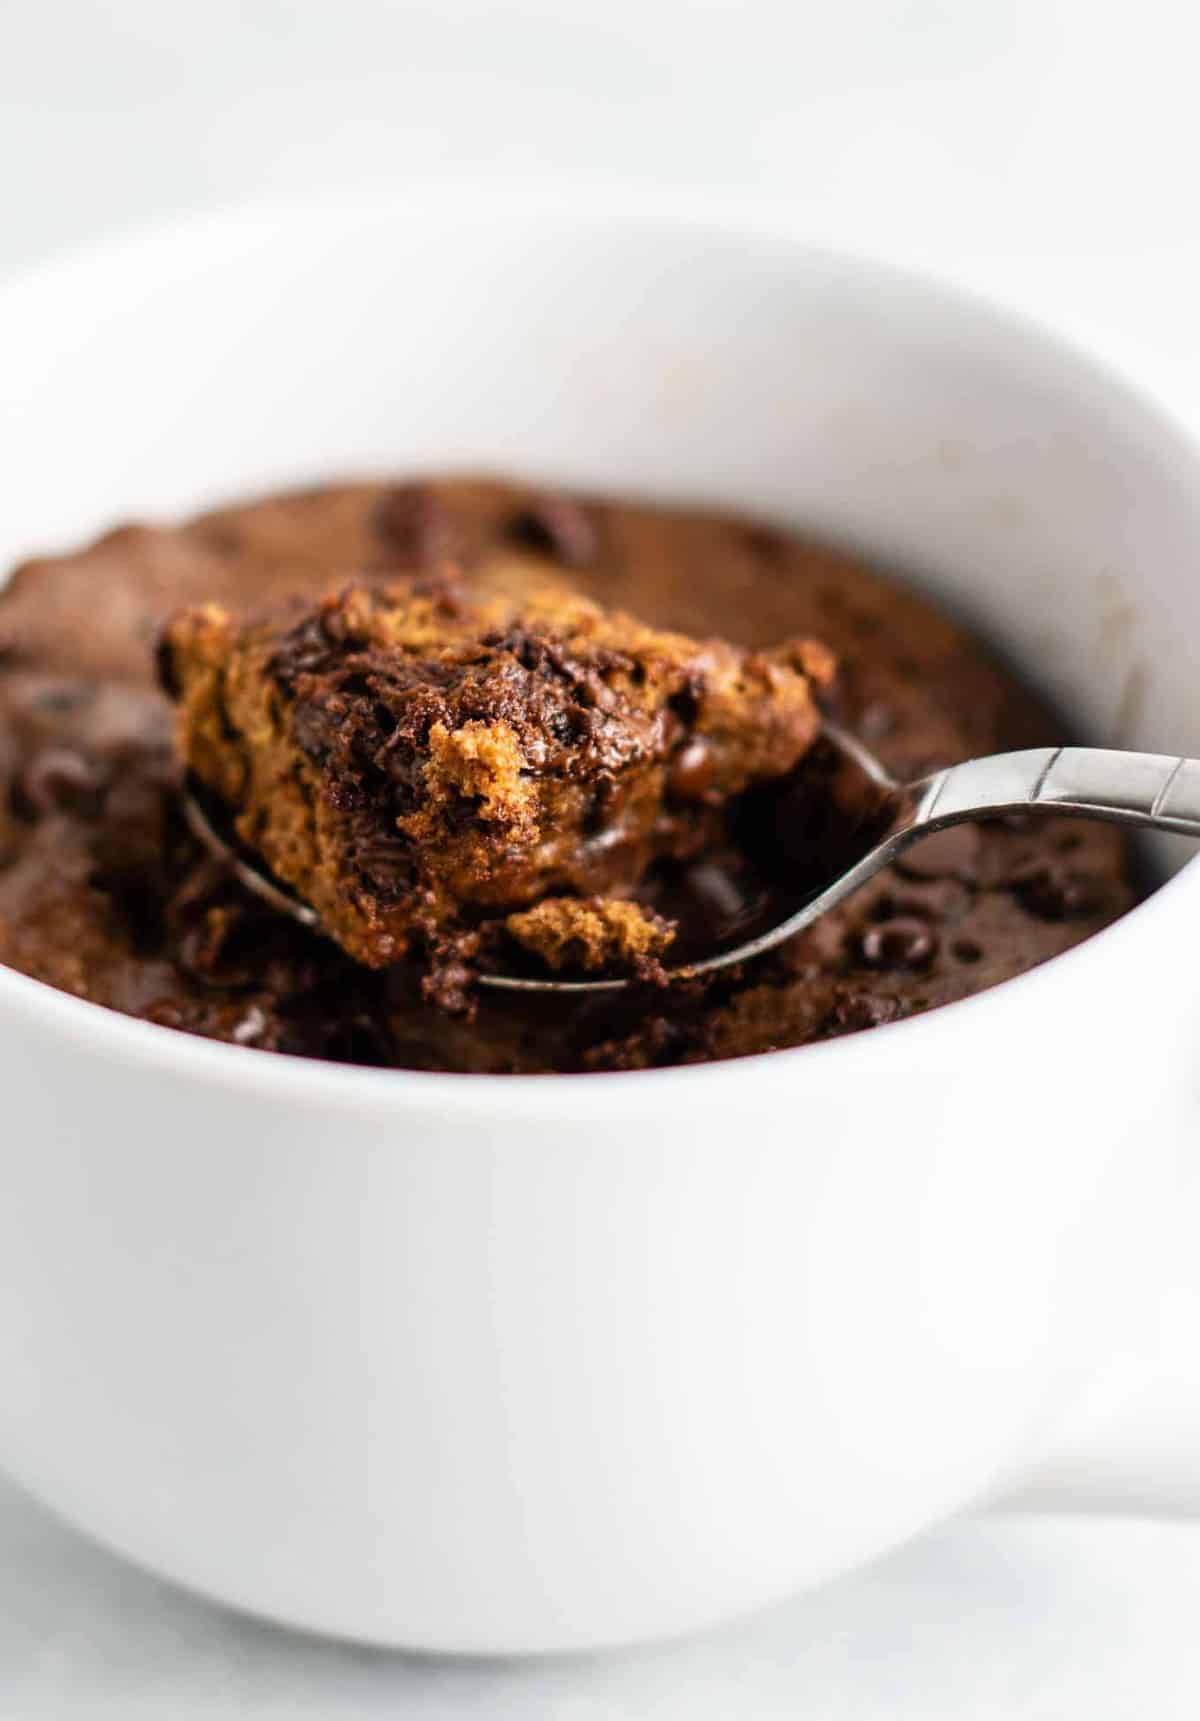 Gluten free chocolate mug cake made with easy to find flours. Perfectly fluffy and so decadent - serve with ice cream!